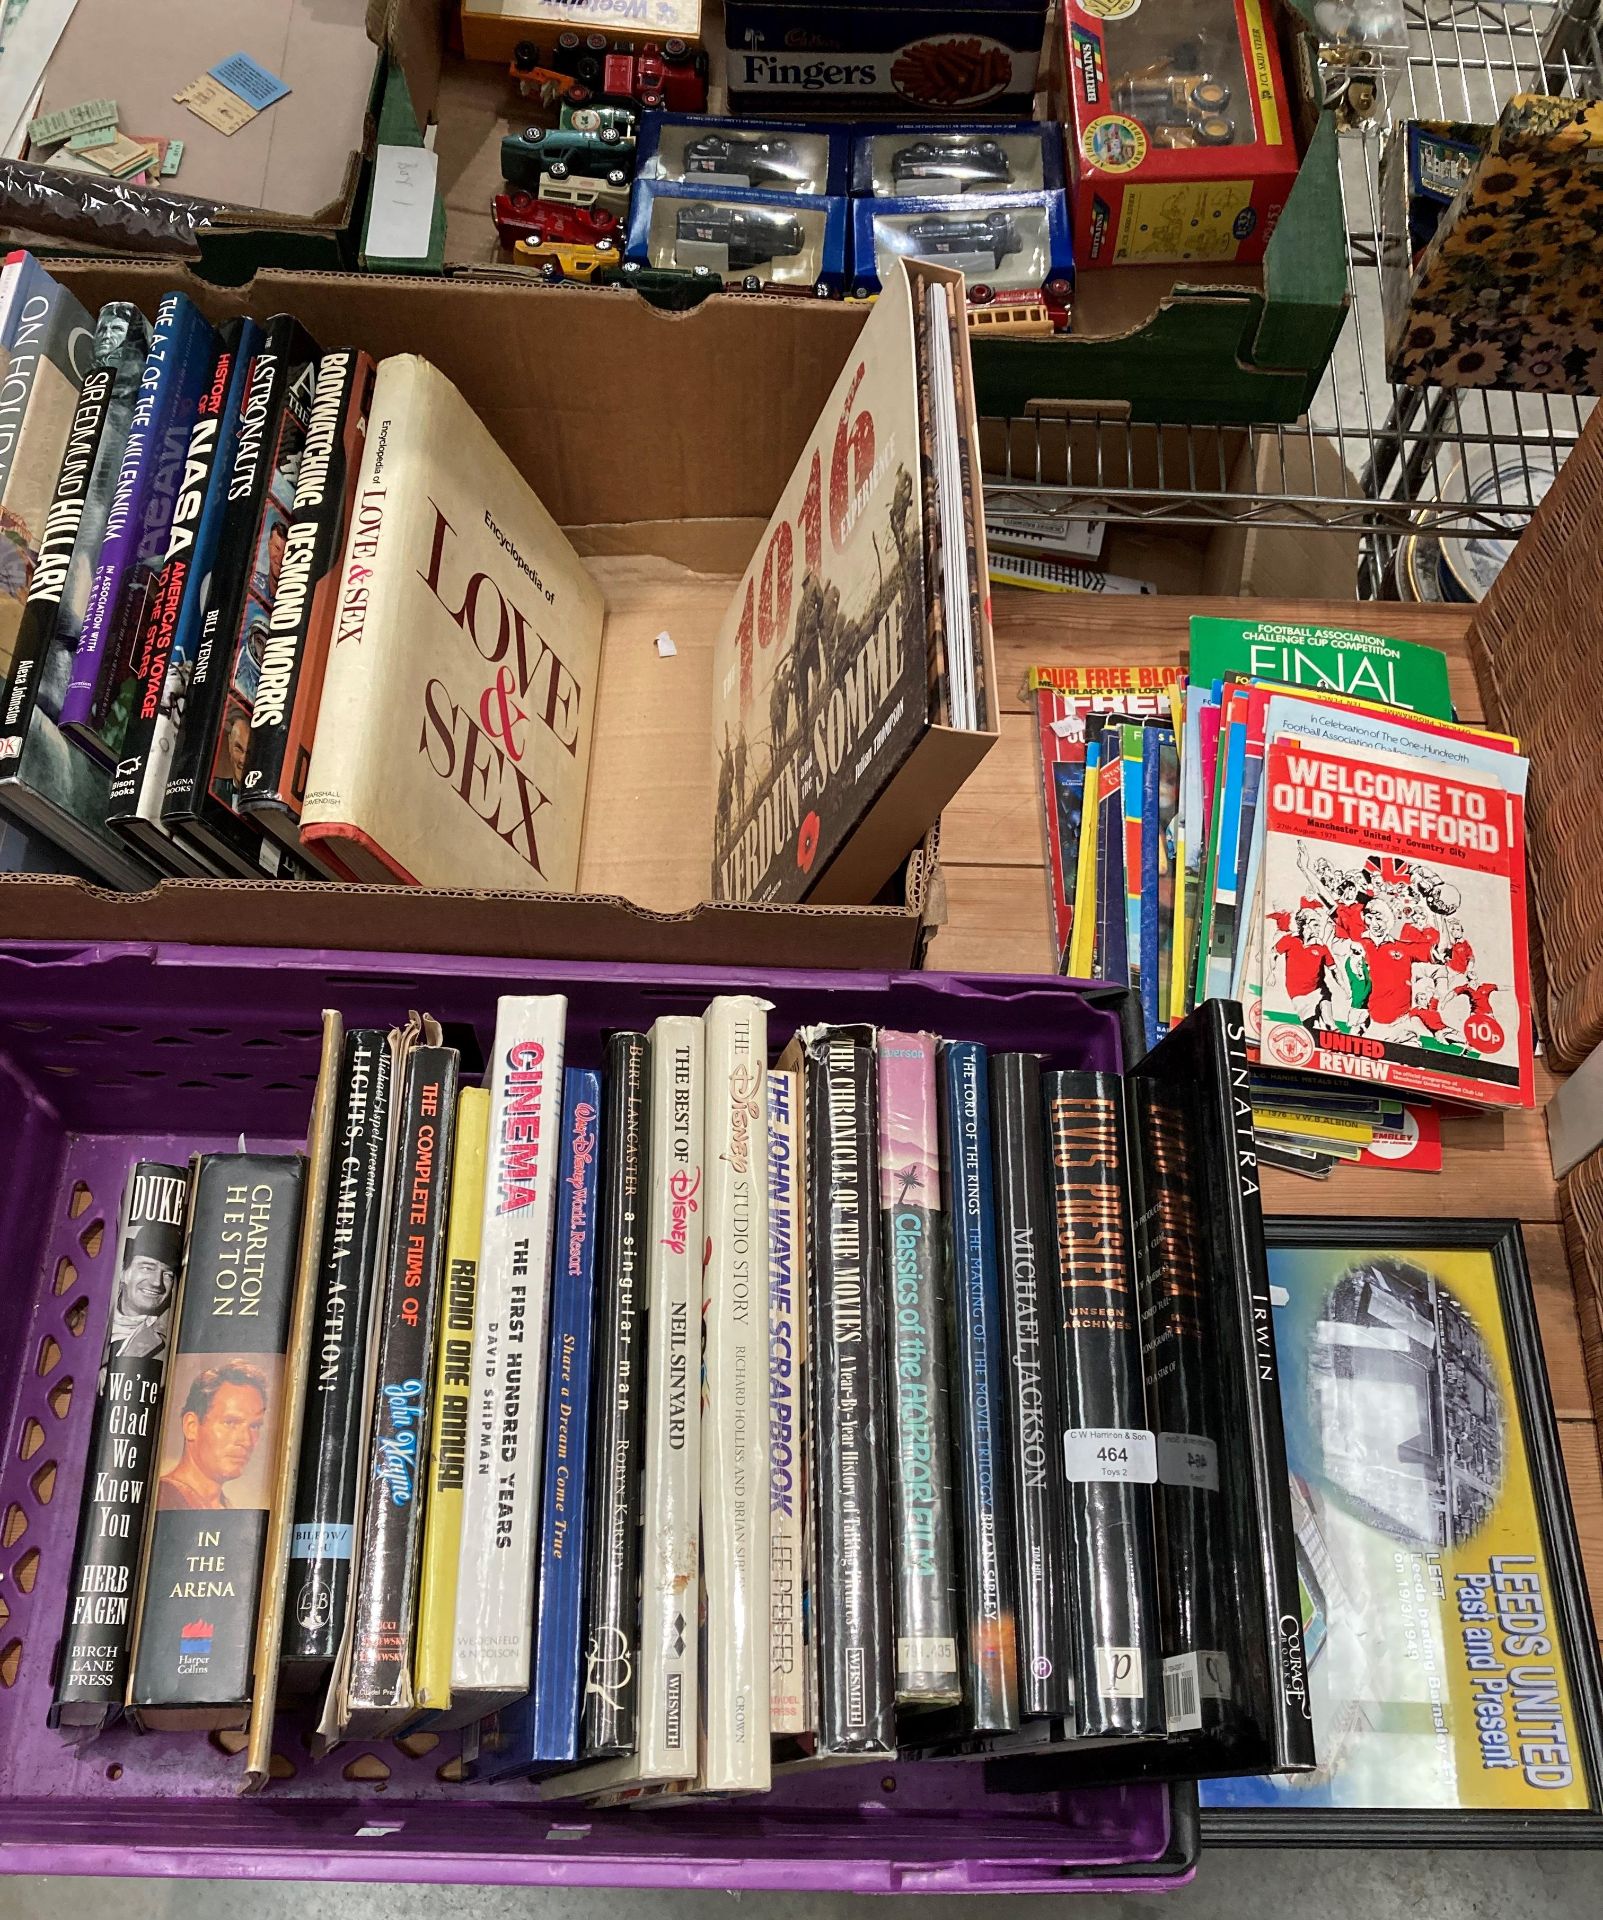 Contents to crate and box (crate not included, property of CWH) - various books on John Wayne,